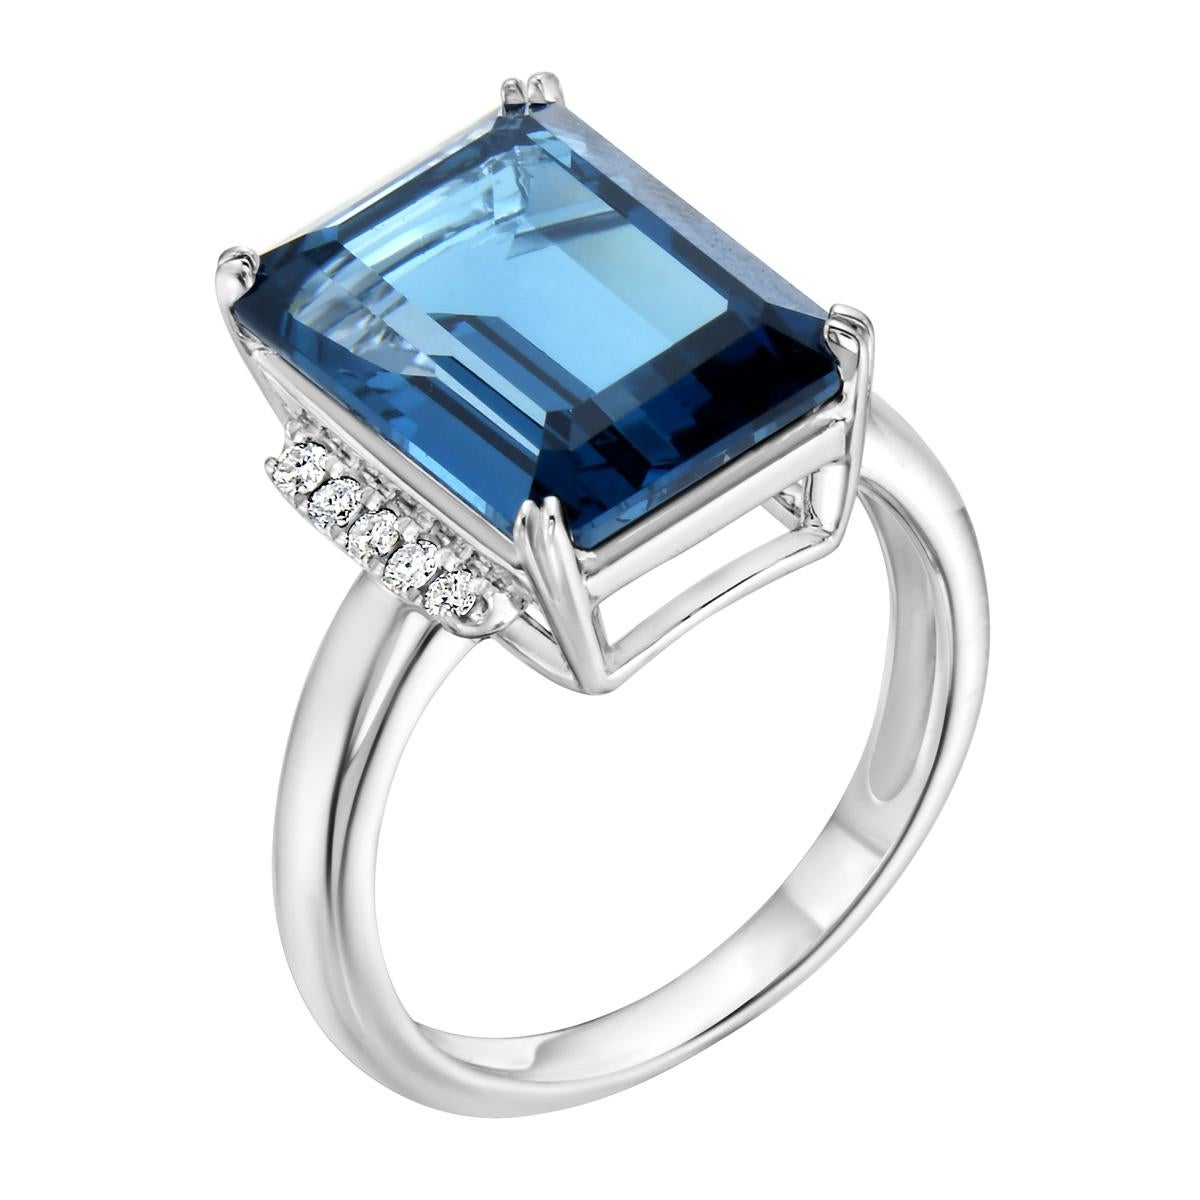 With this exquisite semi-precious white gold London blue topaz emerald cut diamond ring, style and glamour are in the spotlight. This 14-karat ring is made from 3.8 grams of gold and 1 London blue topaz totaling 8.94 karats. This ring is also